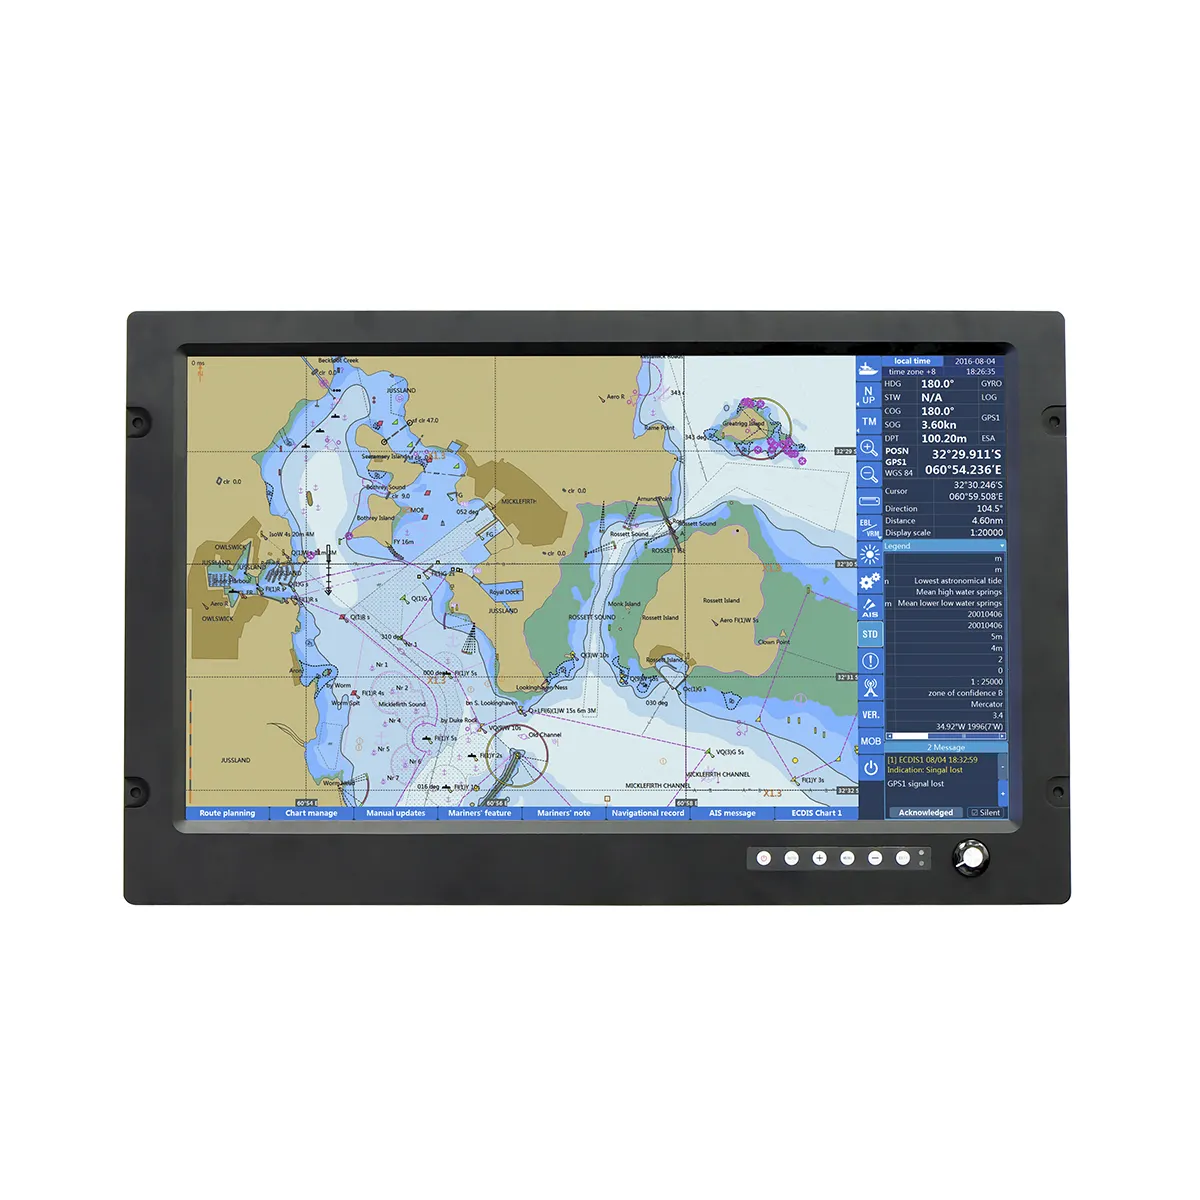 Marine parts & hardware XINUO marine LCD monitor large screen 24" HM-2624 CE IMO standard support AIS chart plotter fish finder